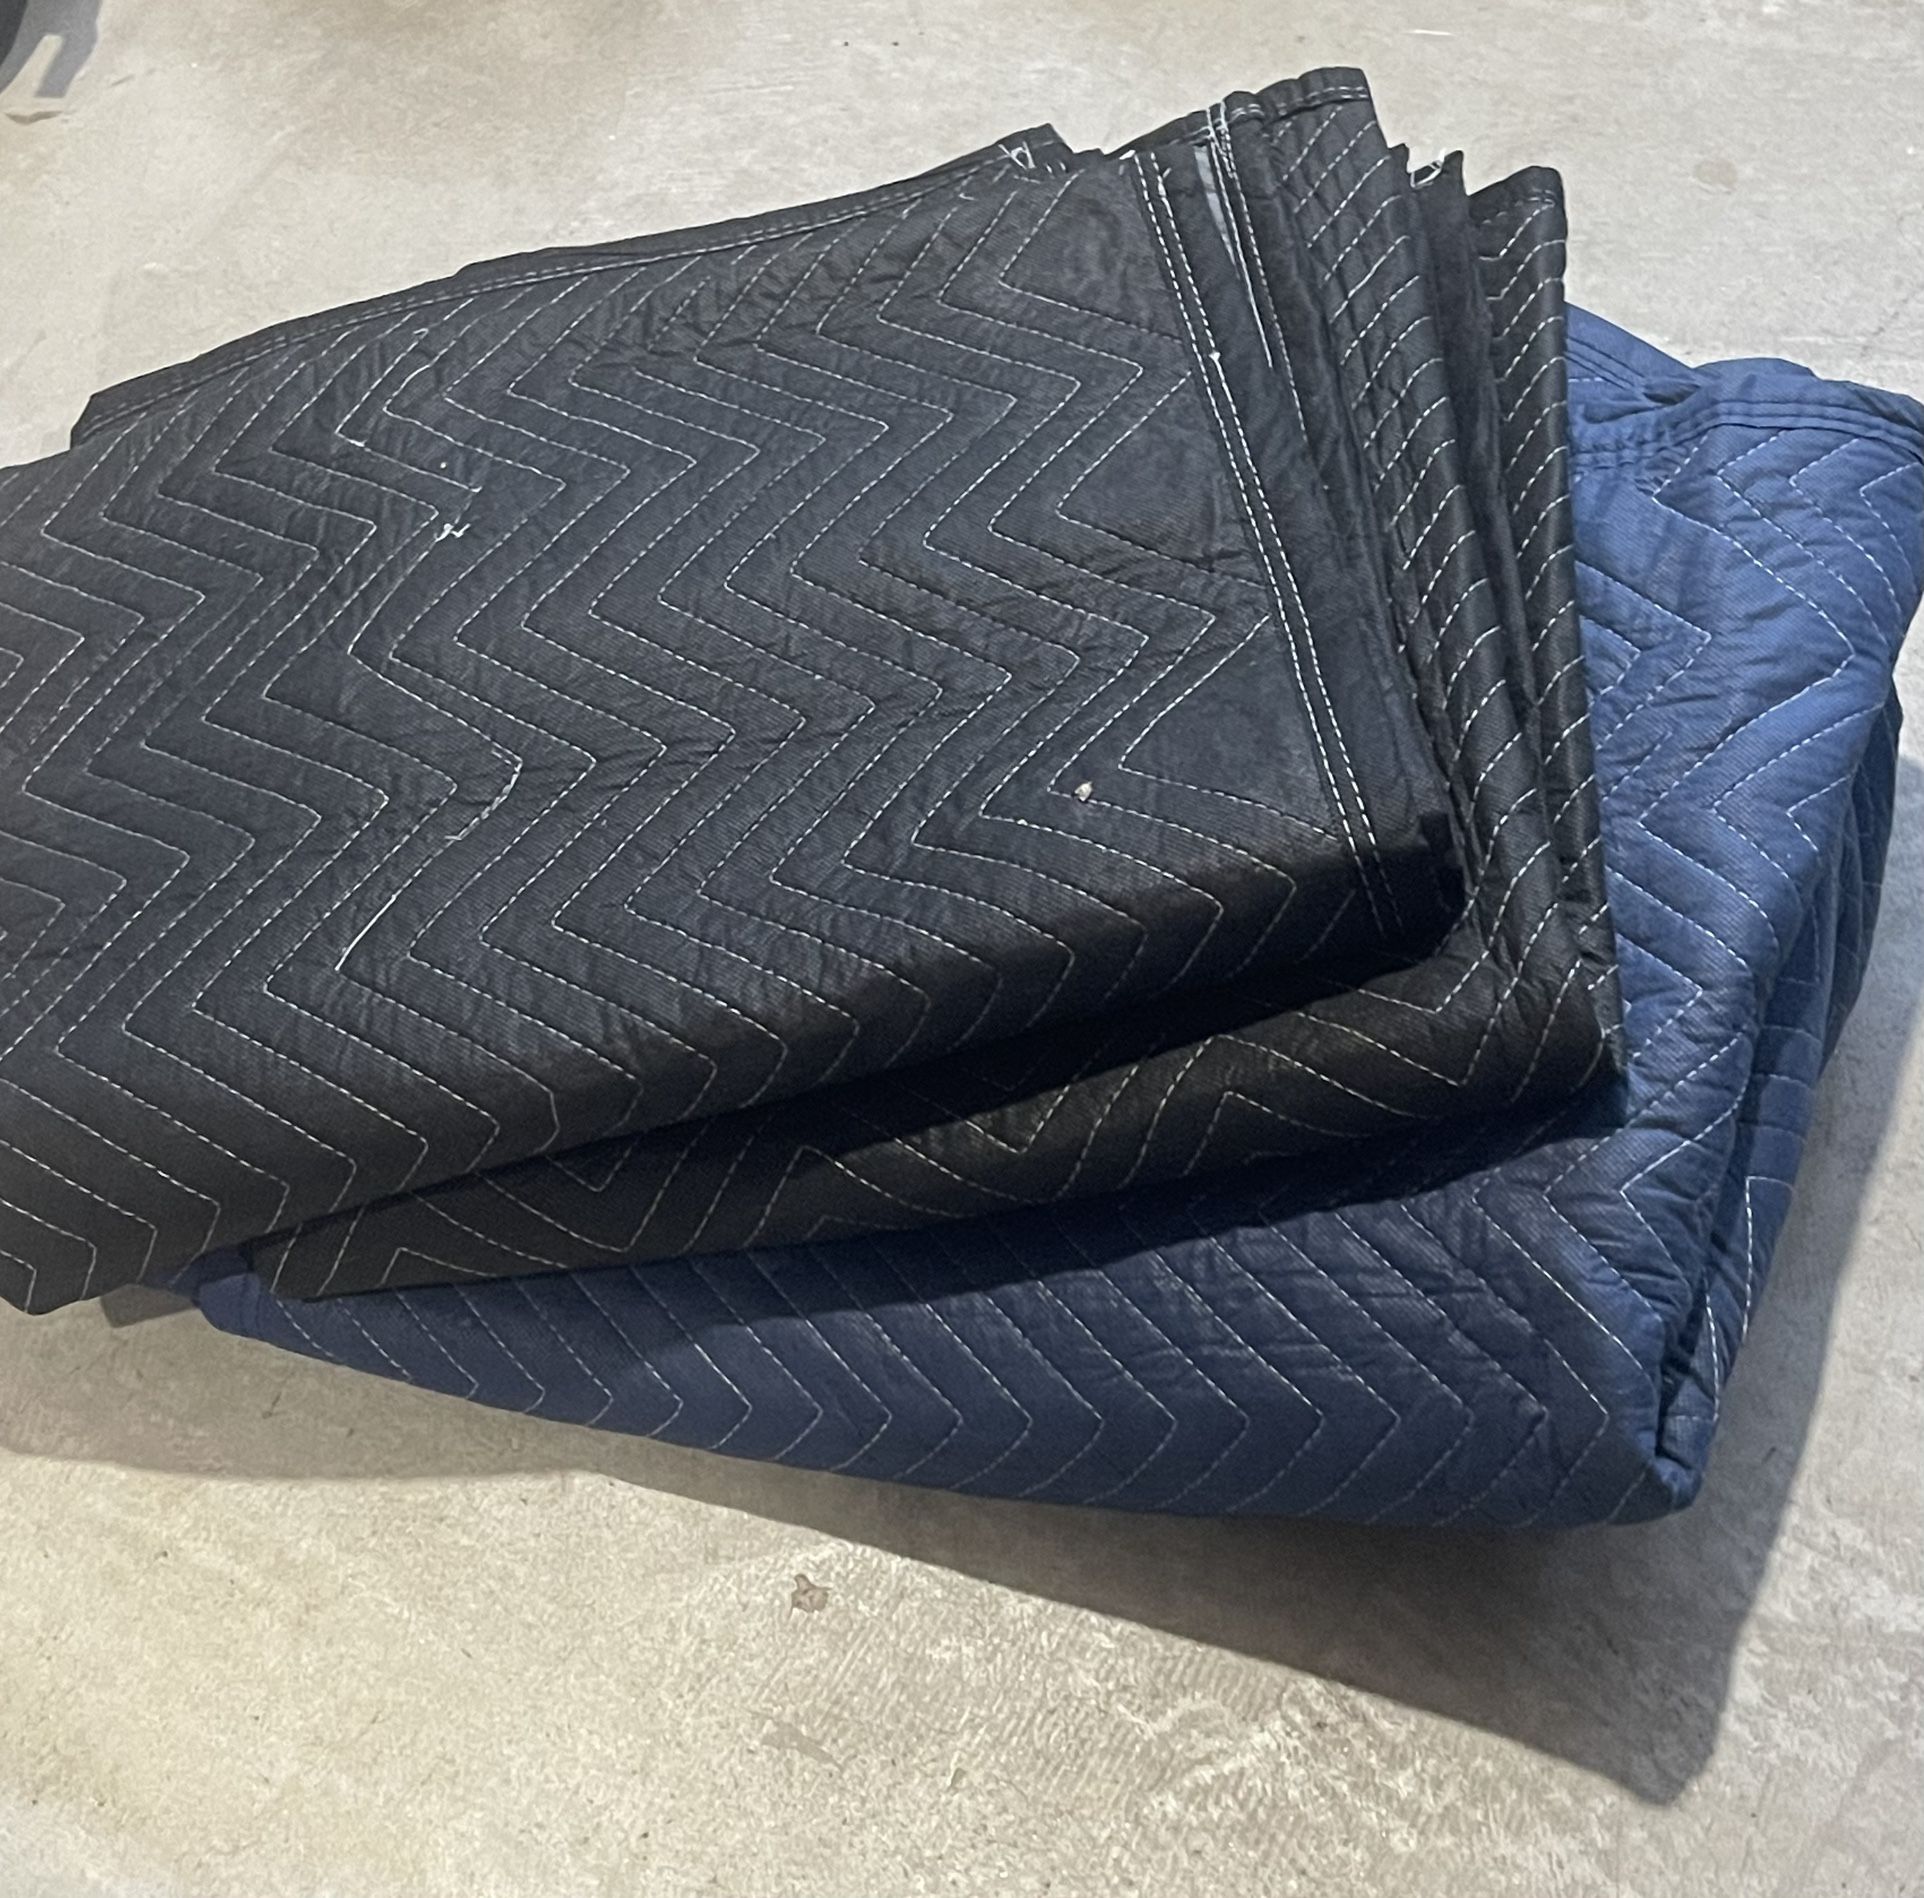 3 Moving Blankets - 2 are 40” x 72” and 1 is 72” x 80” GREAT CONDITION! 